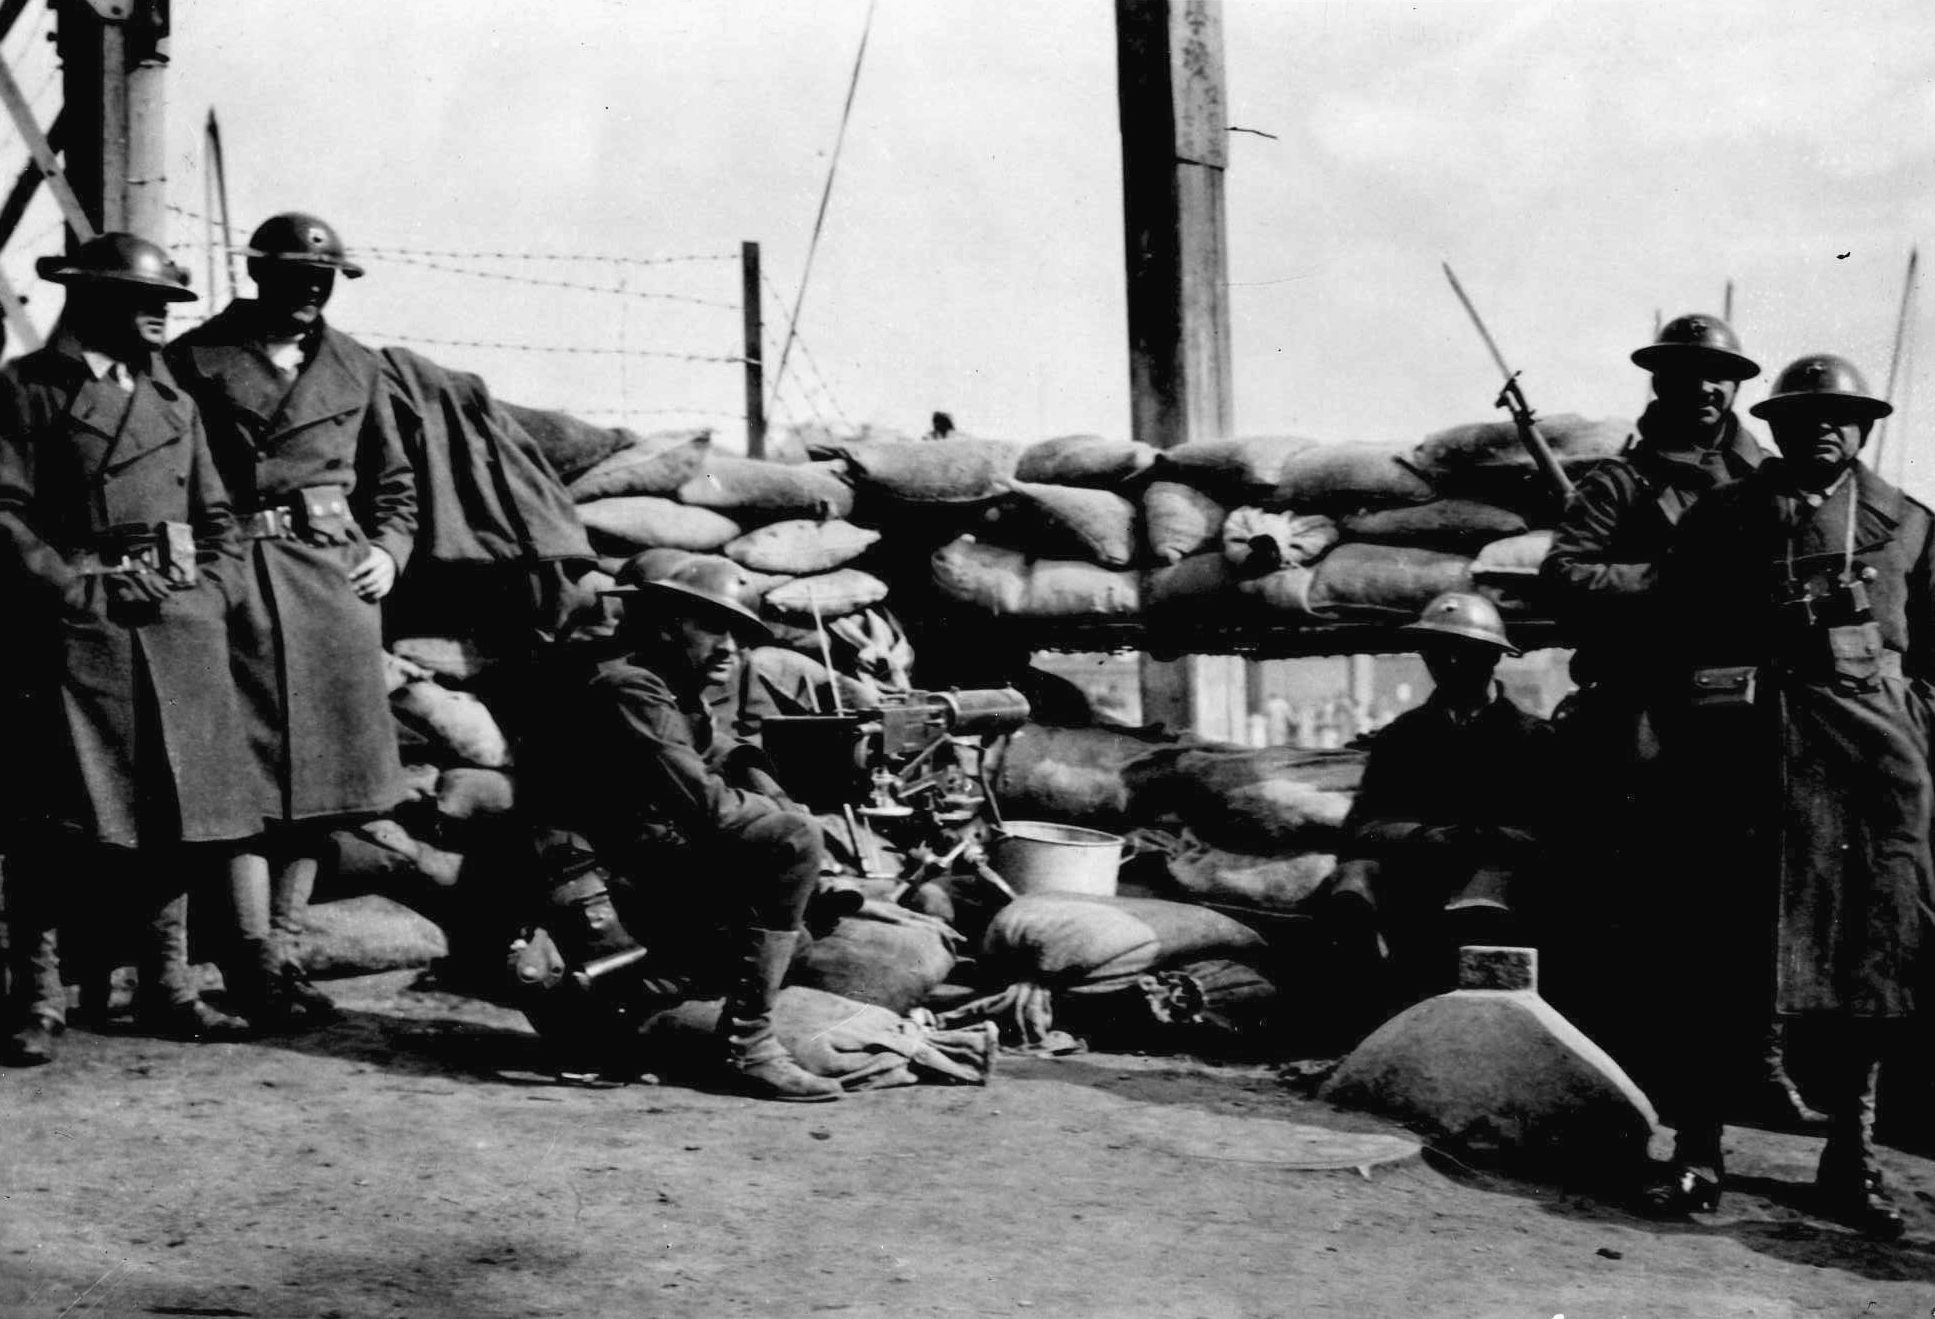 During a pause in the frenzied flight of Chinese refugees from fighting between the Japanese and Allied forces, U.S. Marines take cover behind a barricade of sandbags and man a machine gun near a bridge across Soochow Creek. (National Archives)